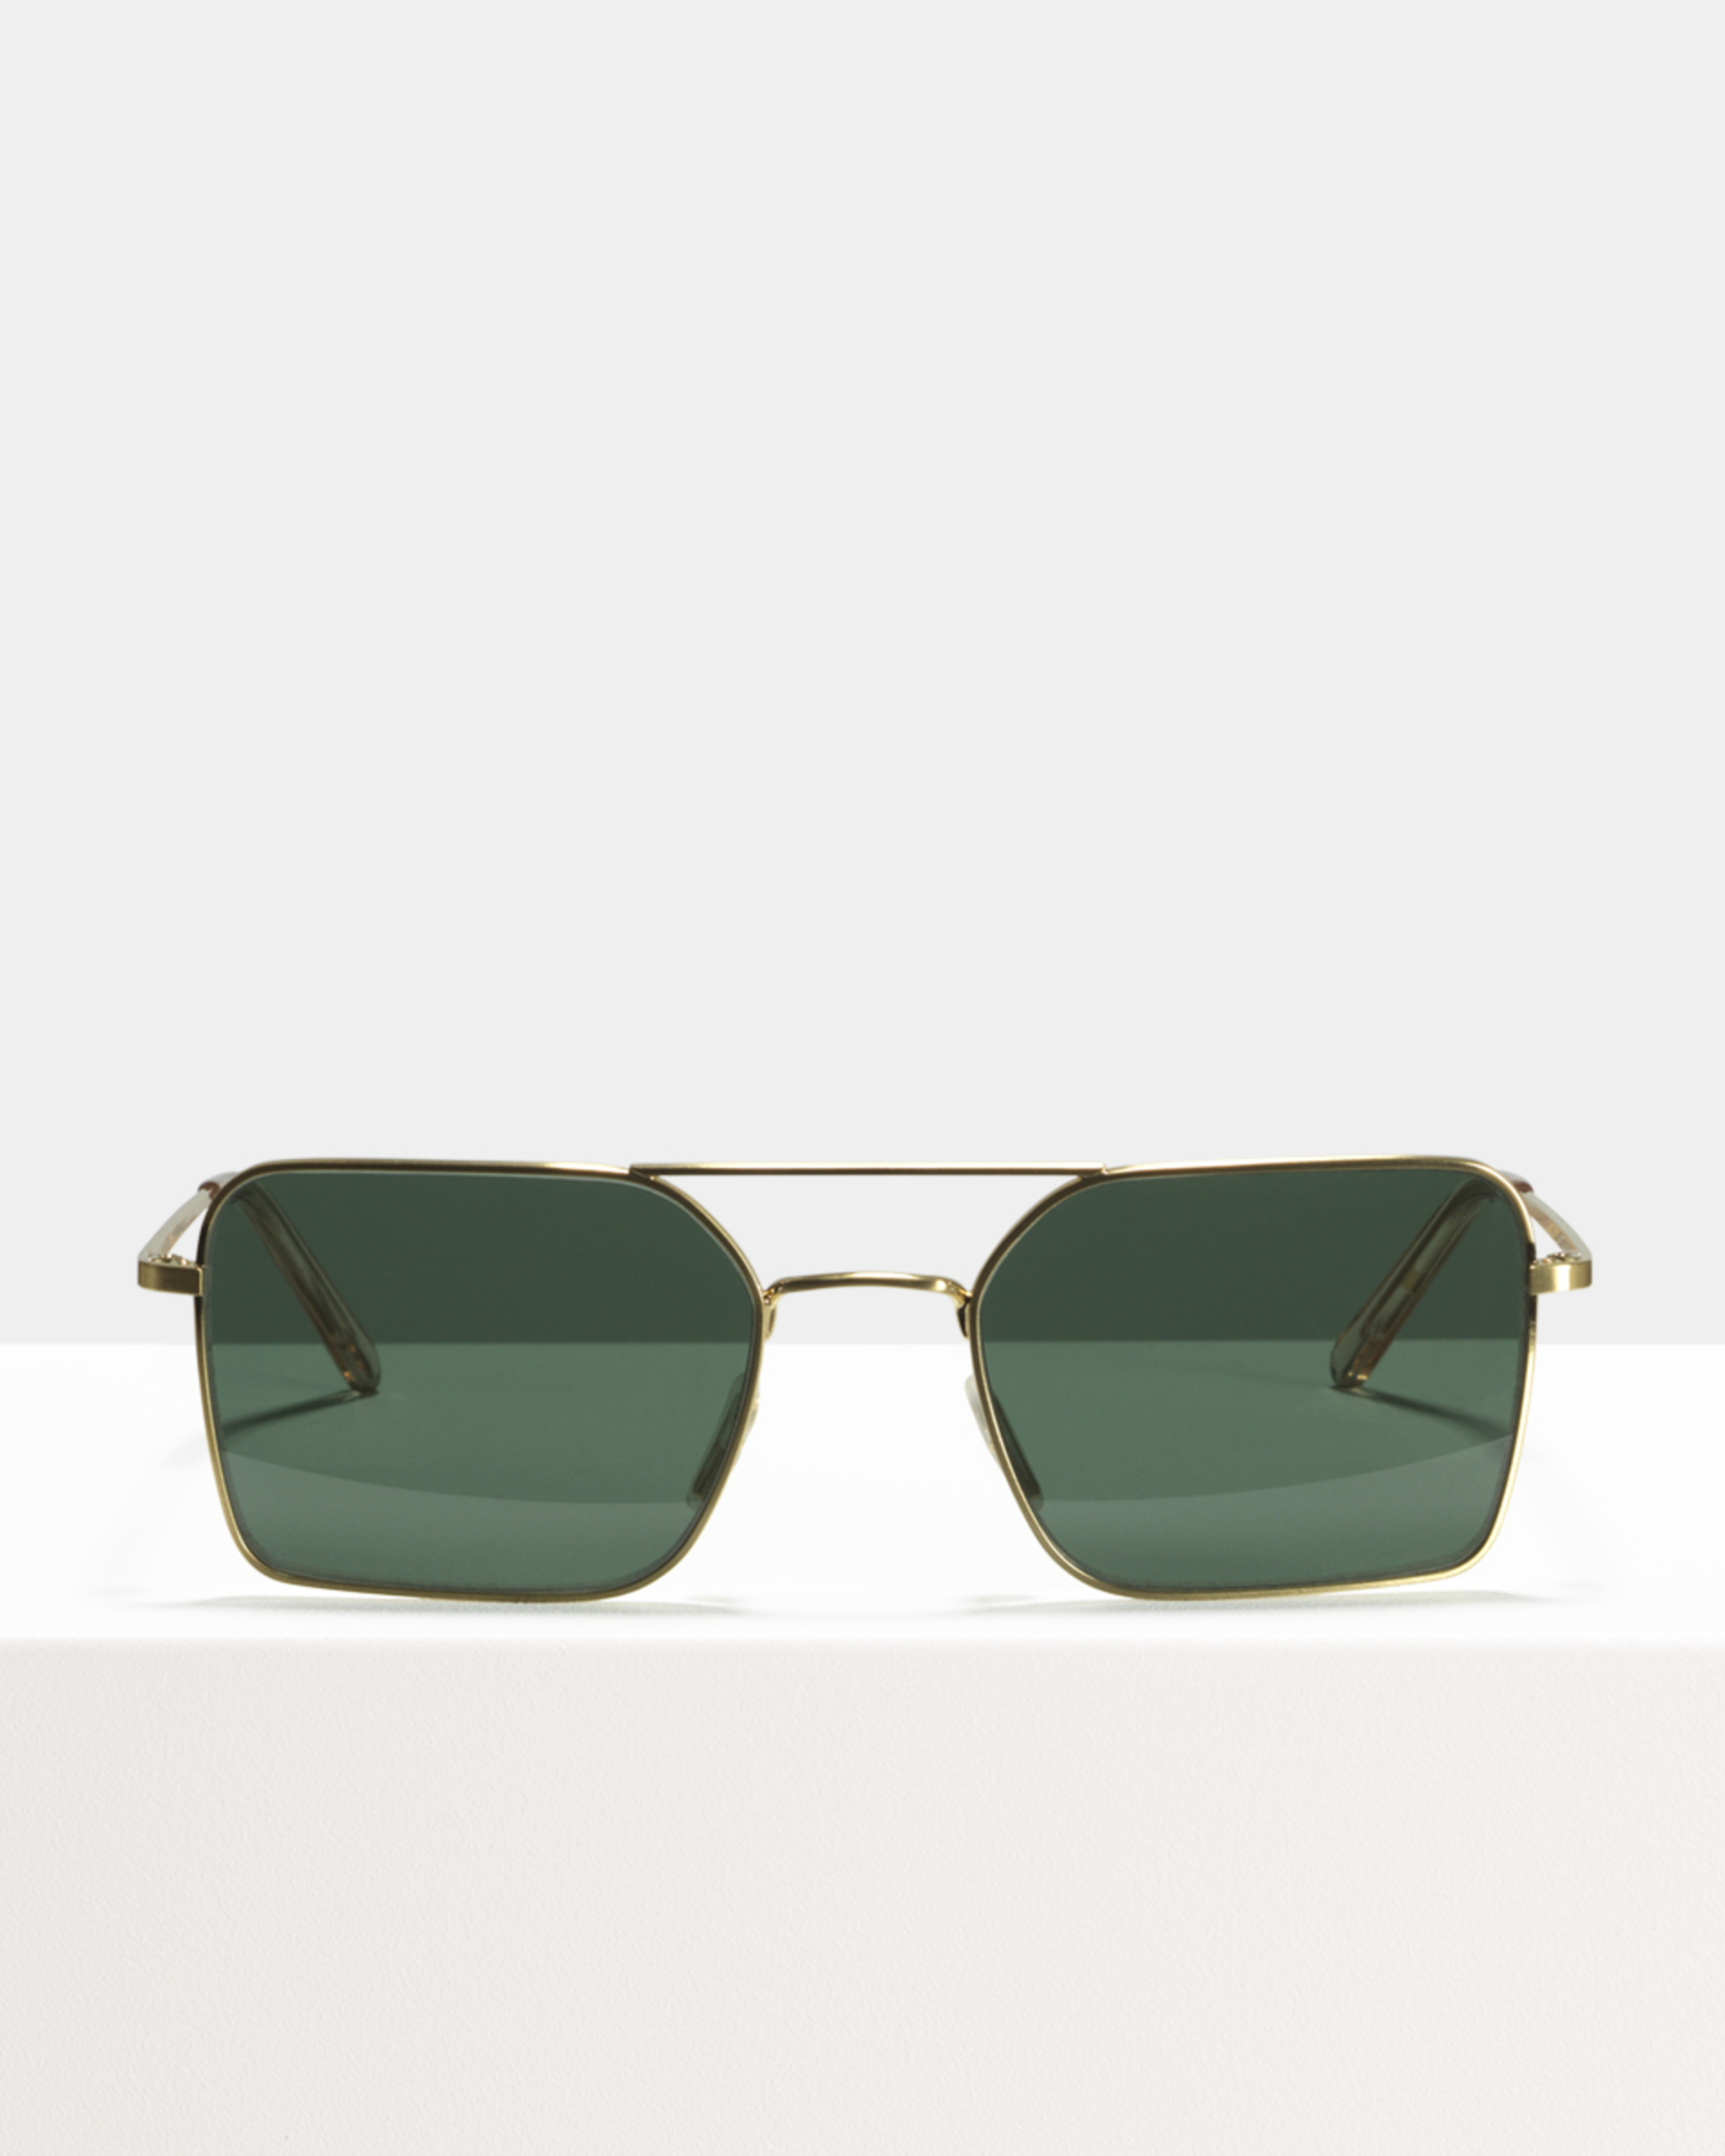 Ace & Tate Sunglasses | rechteckig Metall in Gold